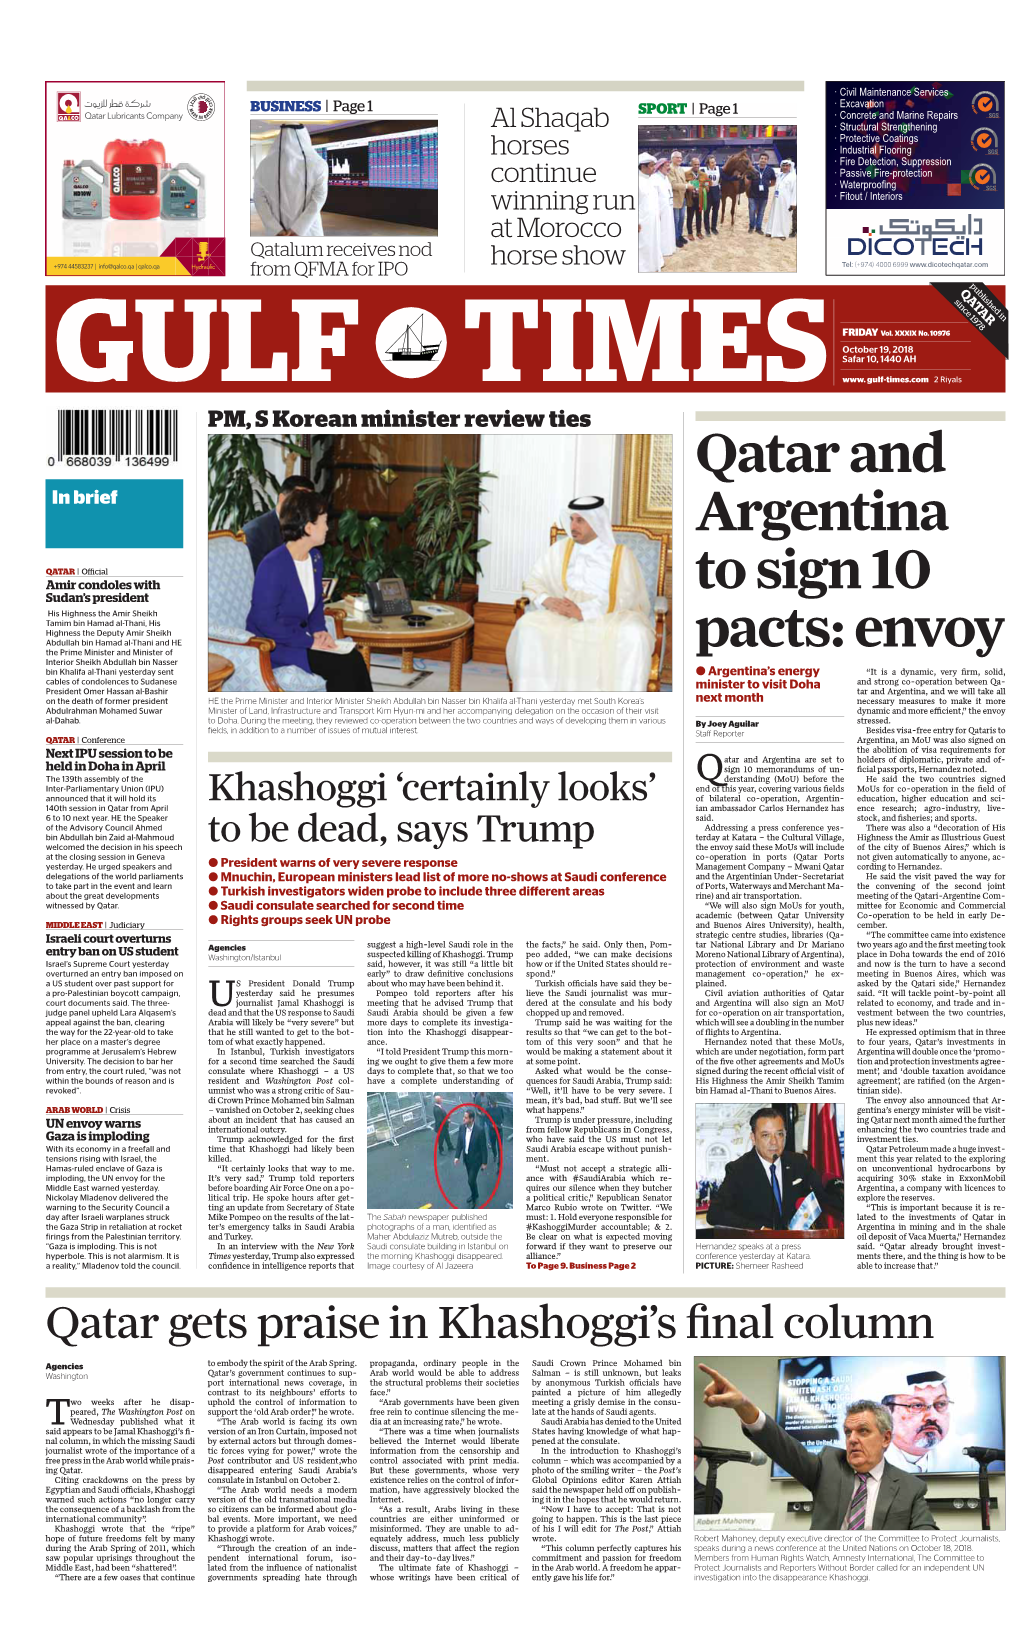 Qatar and Argentina to Sign 10 Pacts